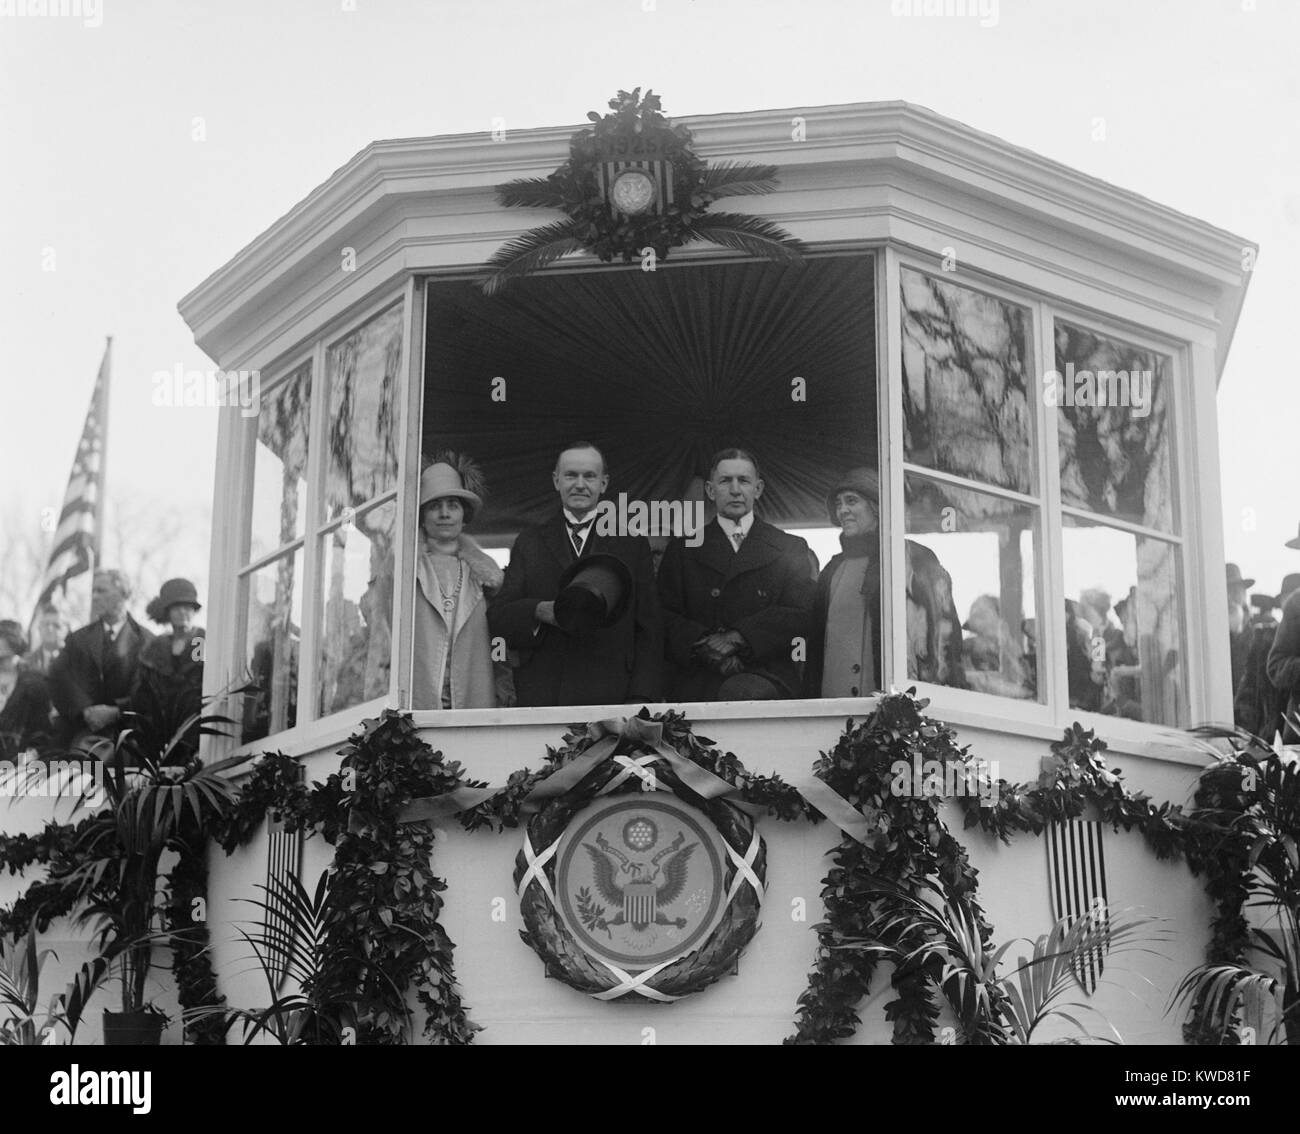 President Calvin Coolidge and VP Charles Dawes in the reviewing stand for their Inaugural Parade. Jan. 20, 1925. With them are their wives, Grace Goodhue Coolidge and Caro Blymyer Dawes. (BSLOC 2015 16 27) Stock Photo